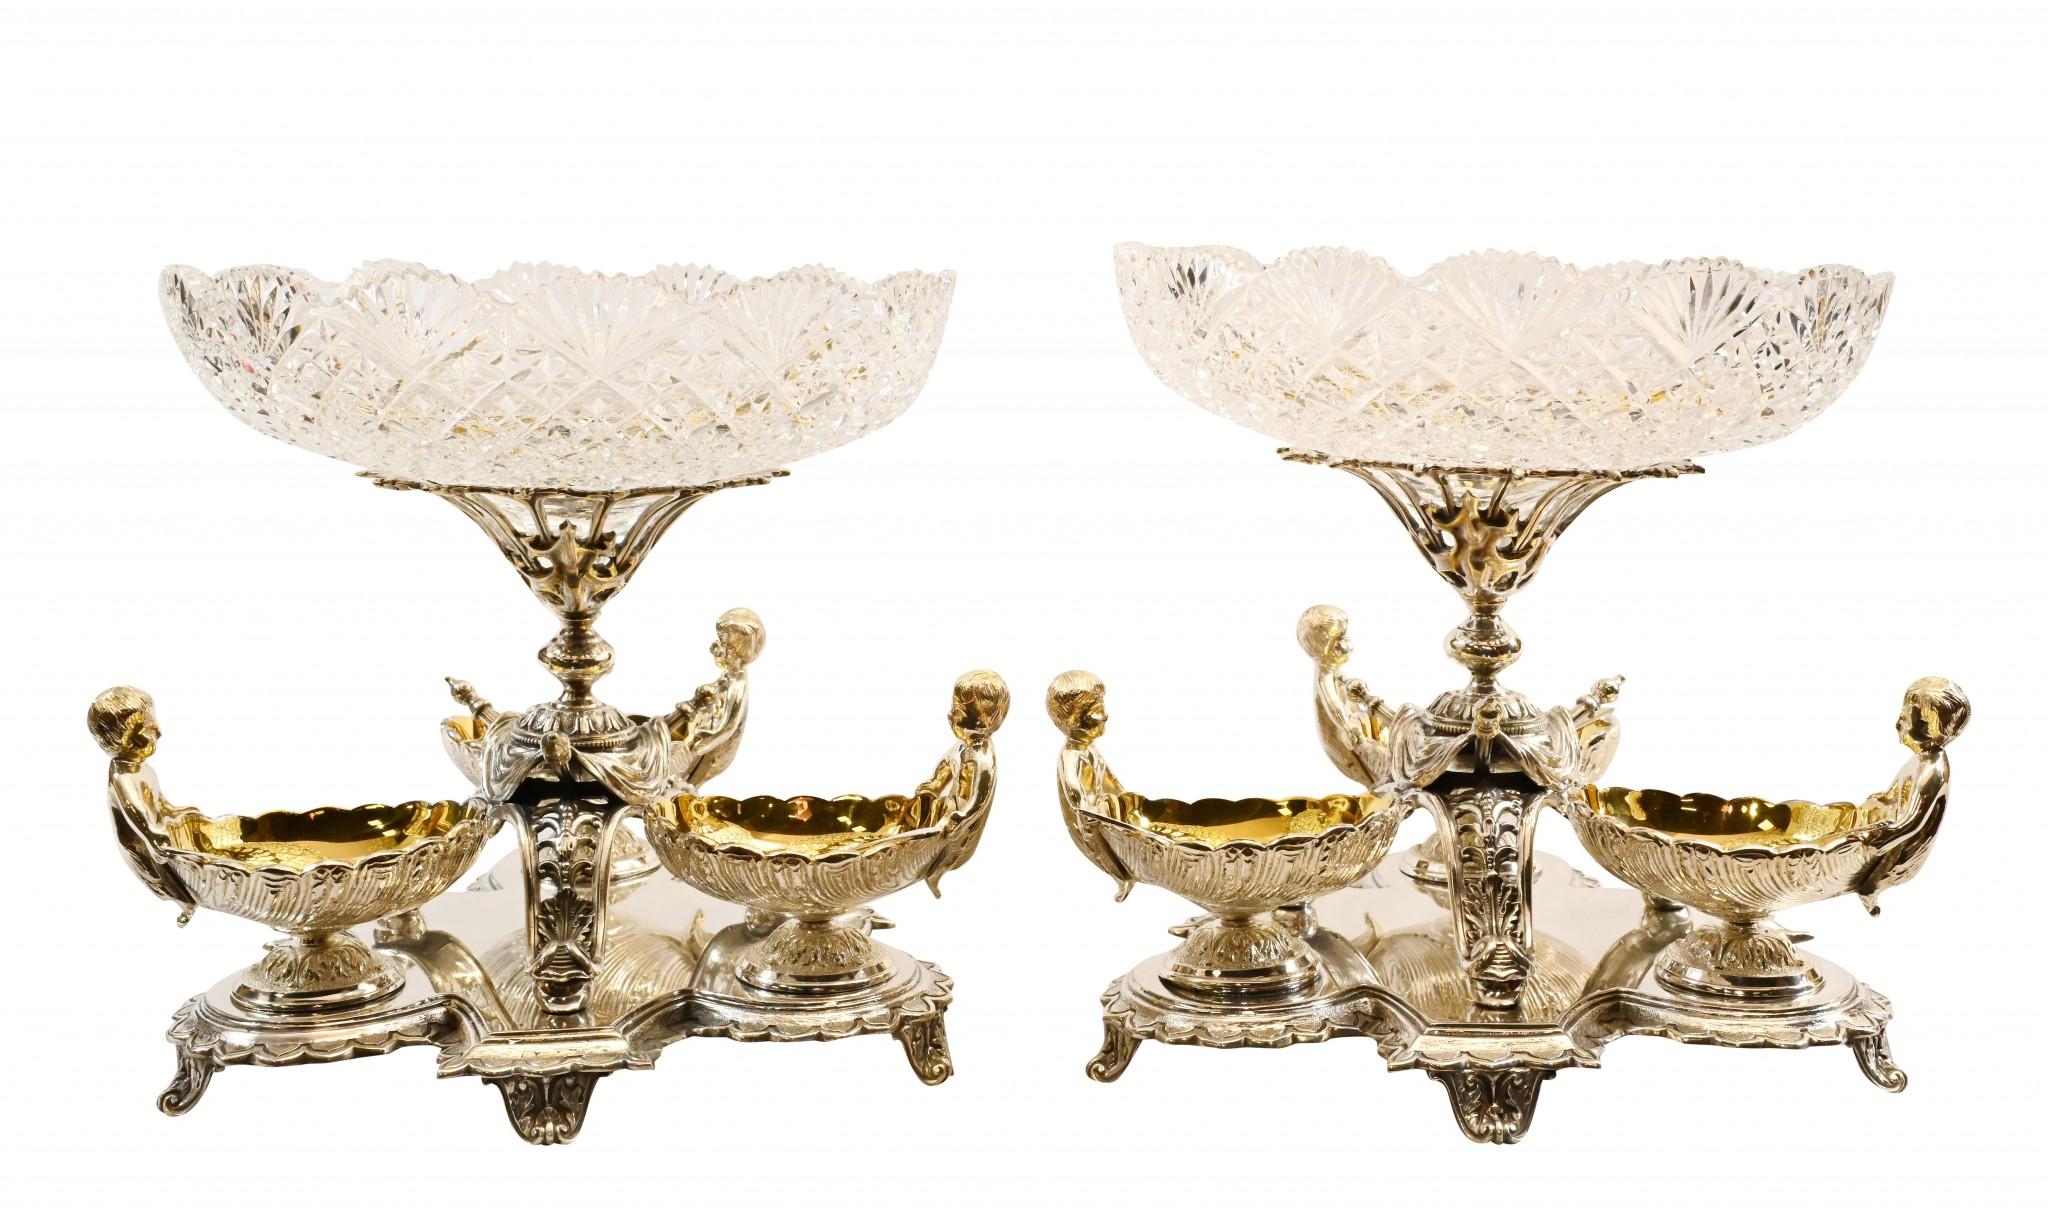 Absolutely stunning pair of Sheffield silver plate cherub bowls
Please see close up of Sheffield hall mark on the underside
Wonderful decorative pair great finish to the silver plate
Crystal cut glass bowls are clear and bright
Cherub dippers